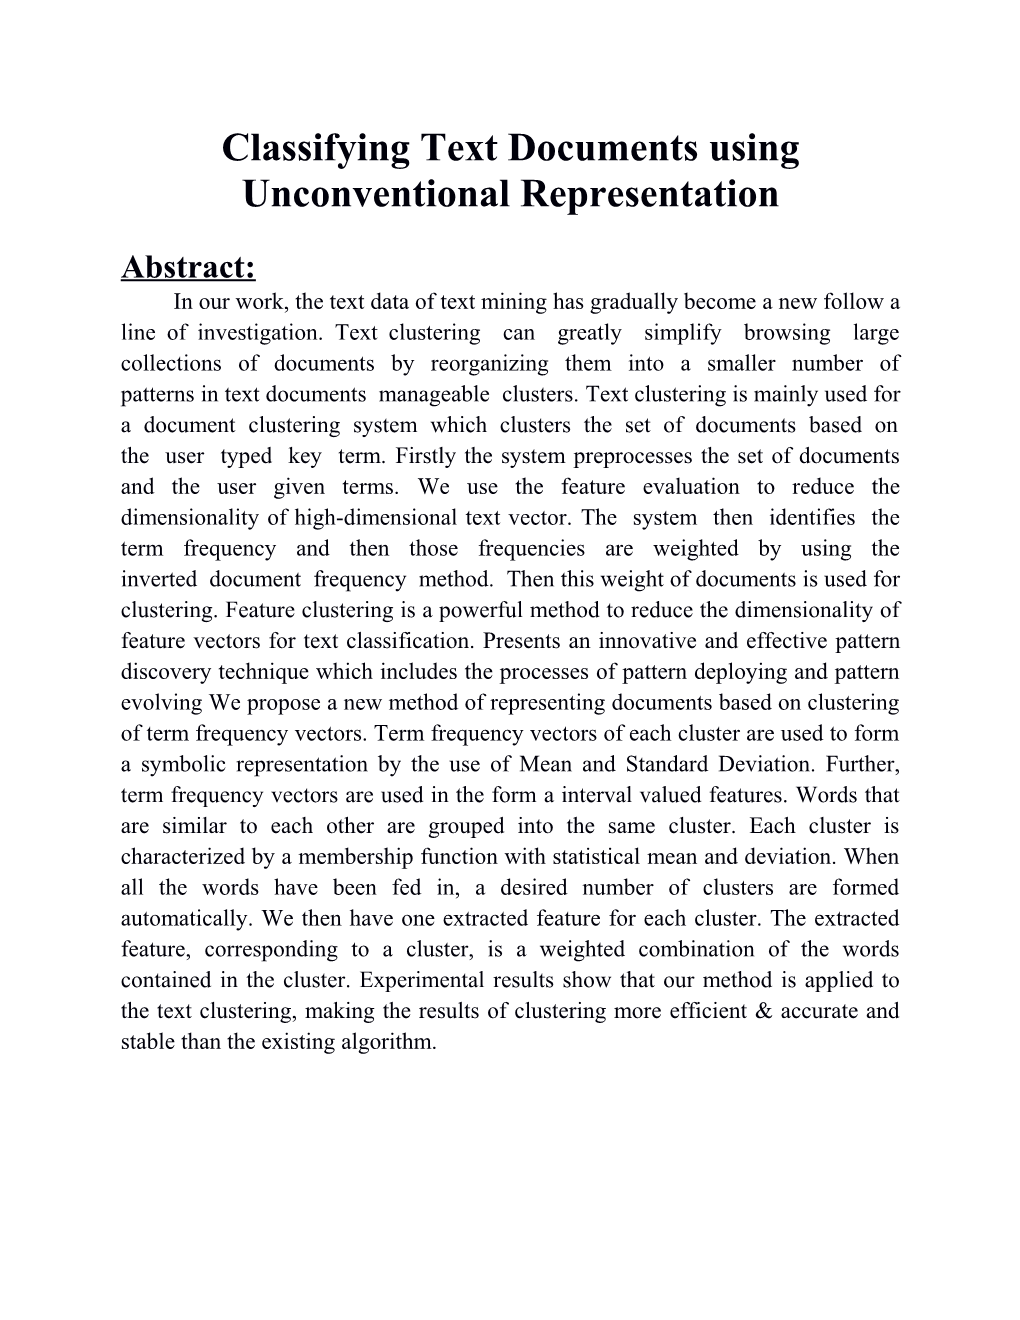 Classifying Text Documents Using Unconventional Representation